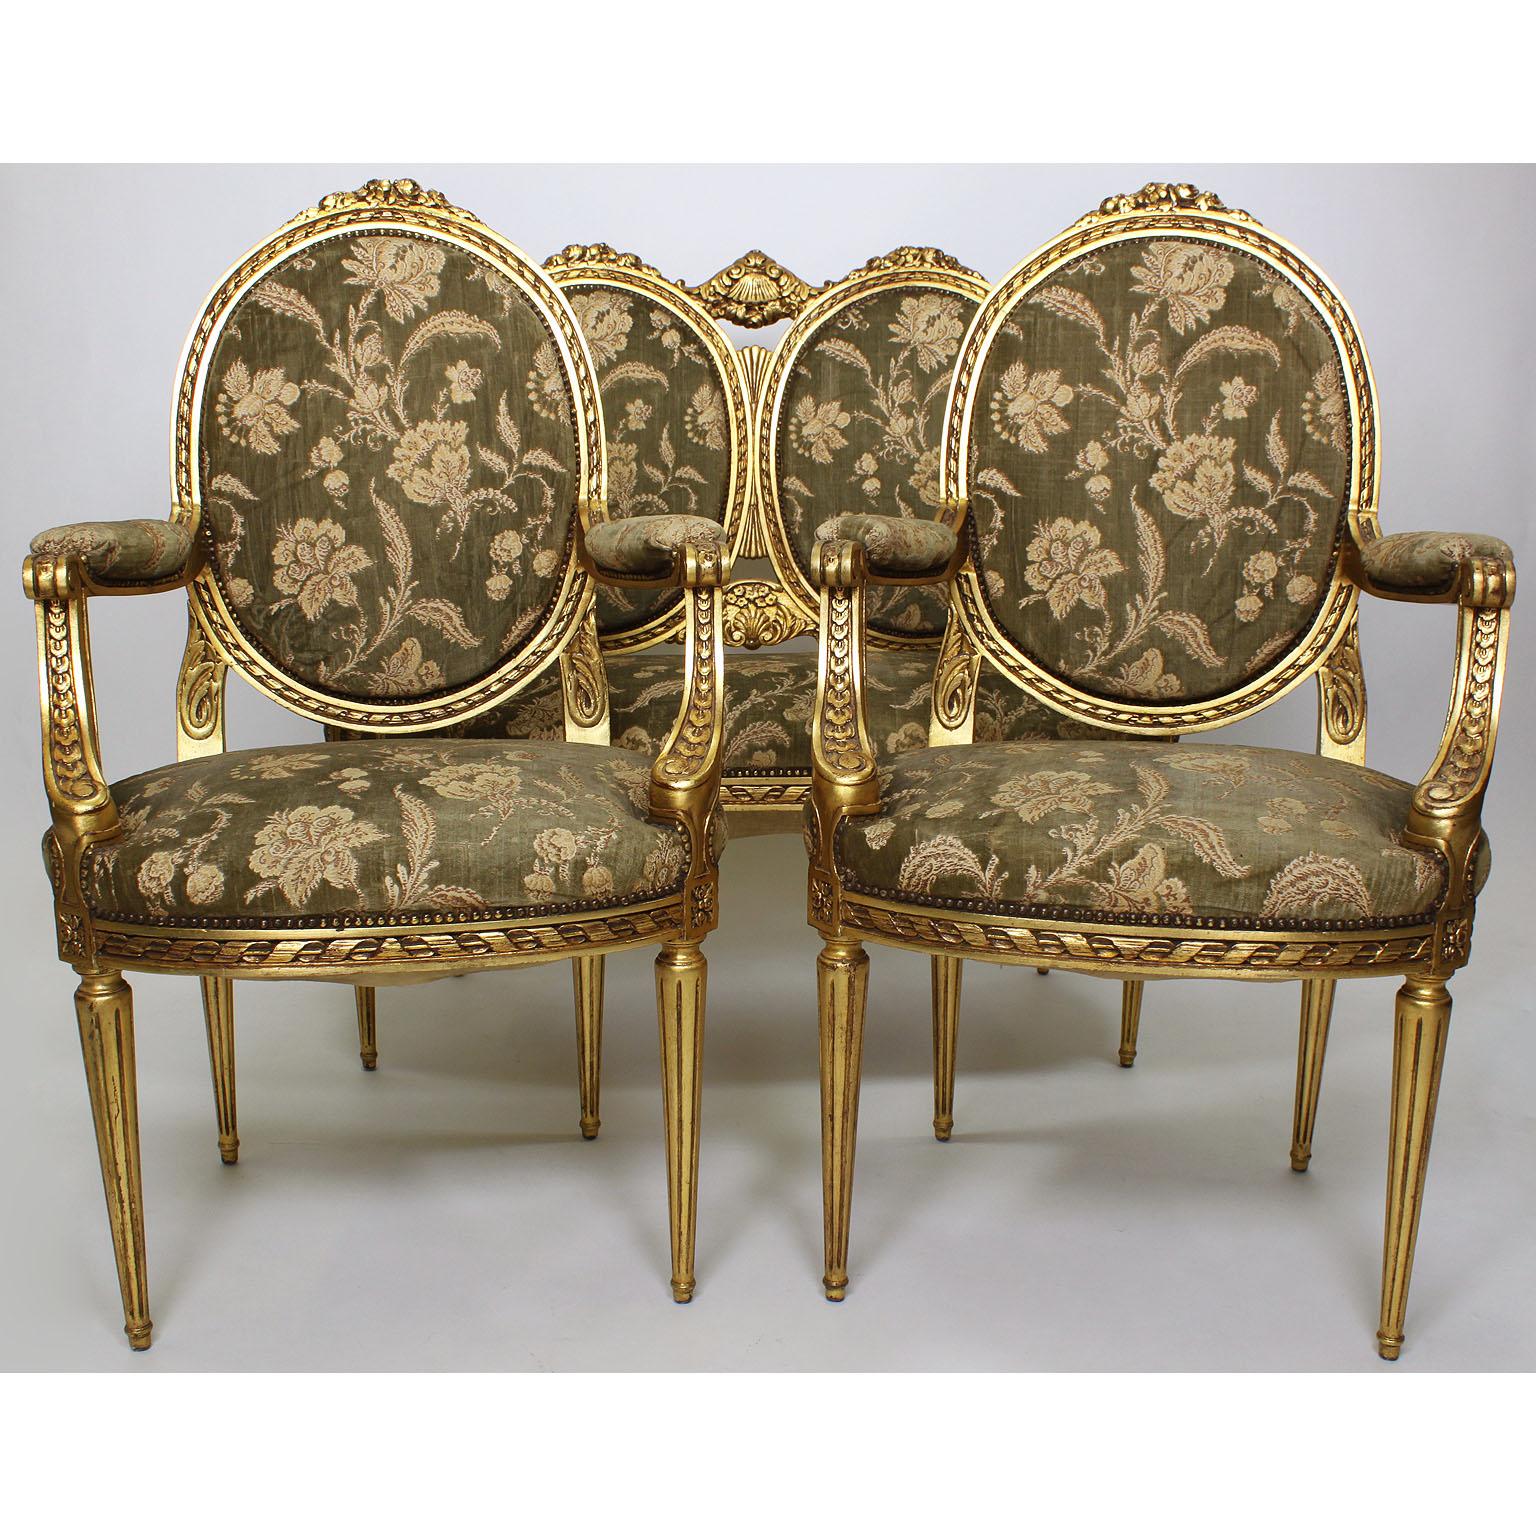 A French Belle époque Louis XVI style giltwood carved three-piece parlor salon suite, comprising of a two-corps canapé (settee) and a pair of fauteuils (armchairs) Paris, circa 1900.

Measures: Settee height: 42 1/2 inches (108 cm)
Settee width: